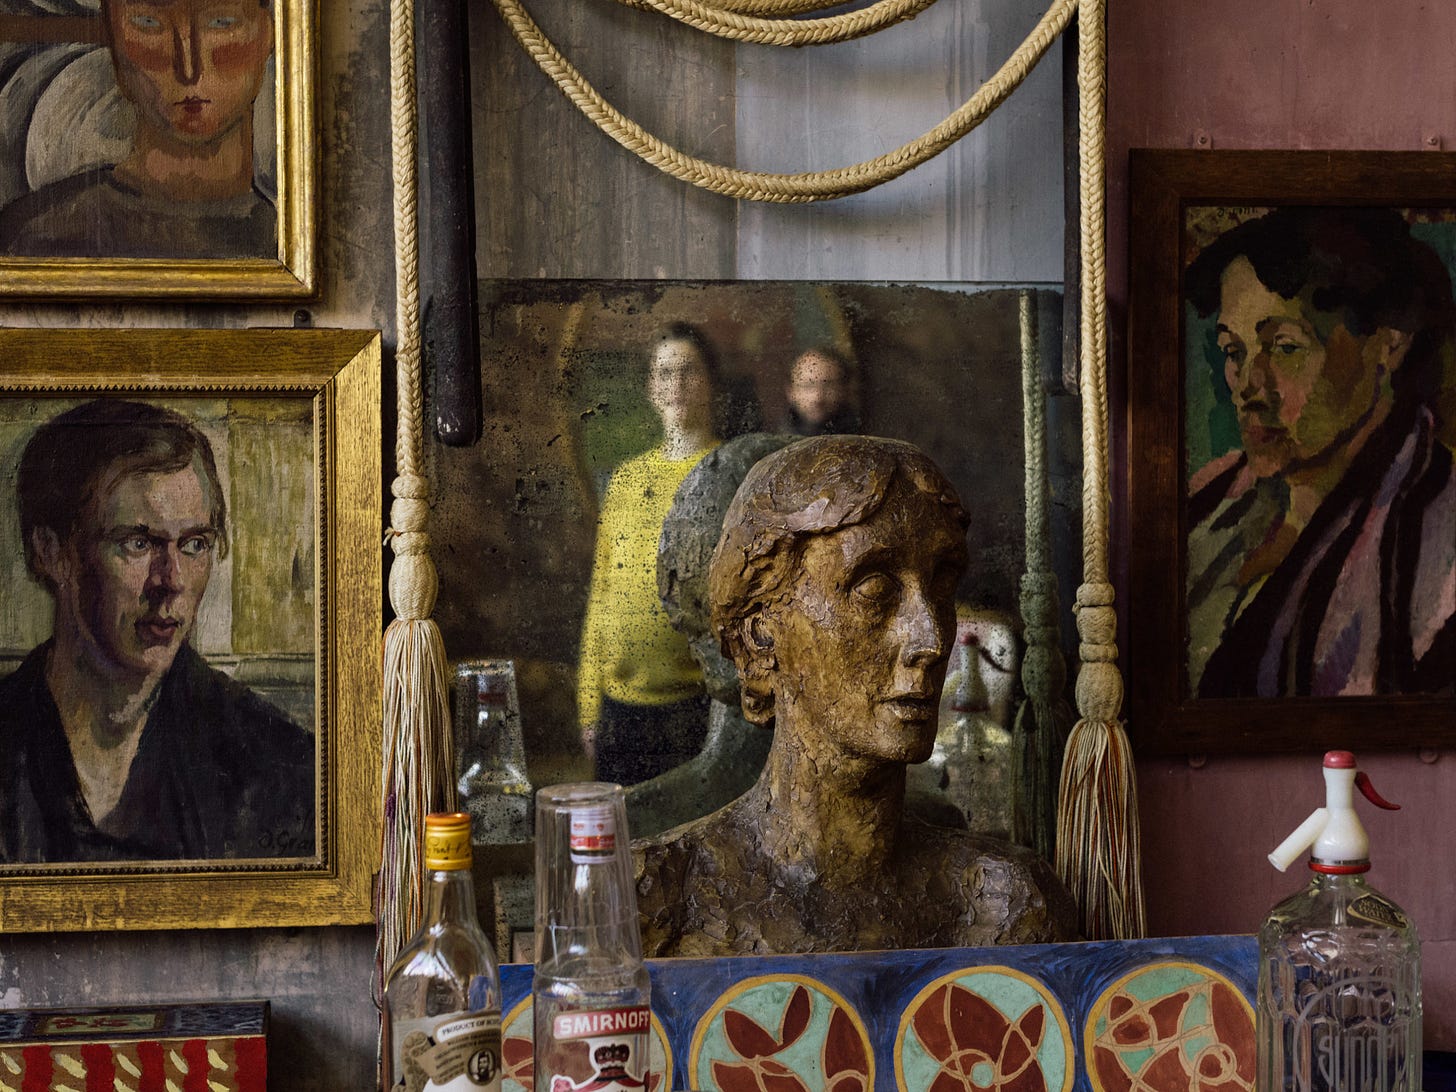 Crowded scene with multiple paintings in the background, a bust of Virginia Woolf in the center, old bottles and decorative items scattered about. 